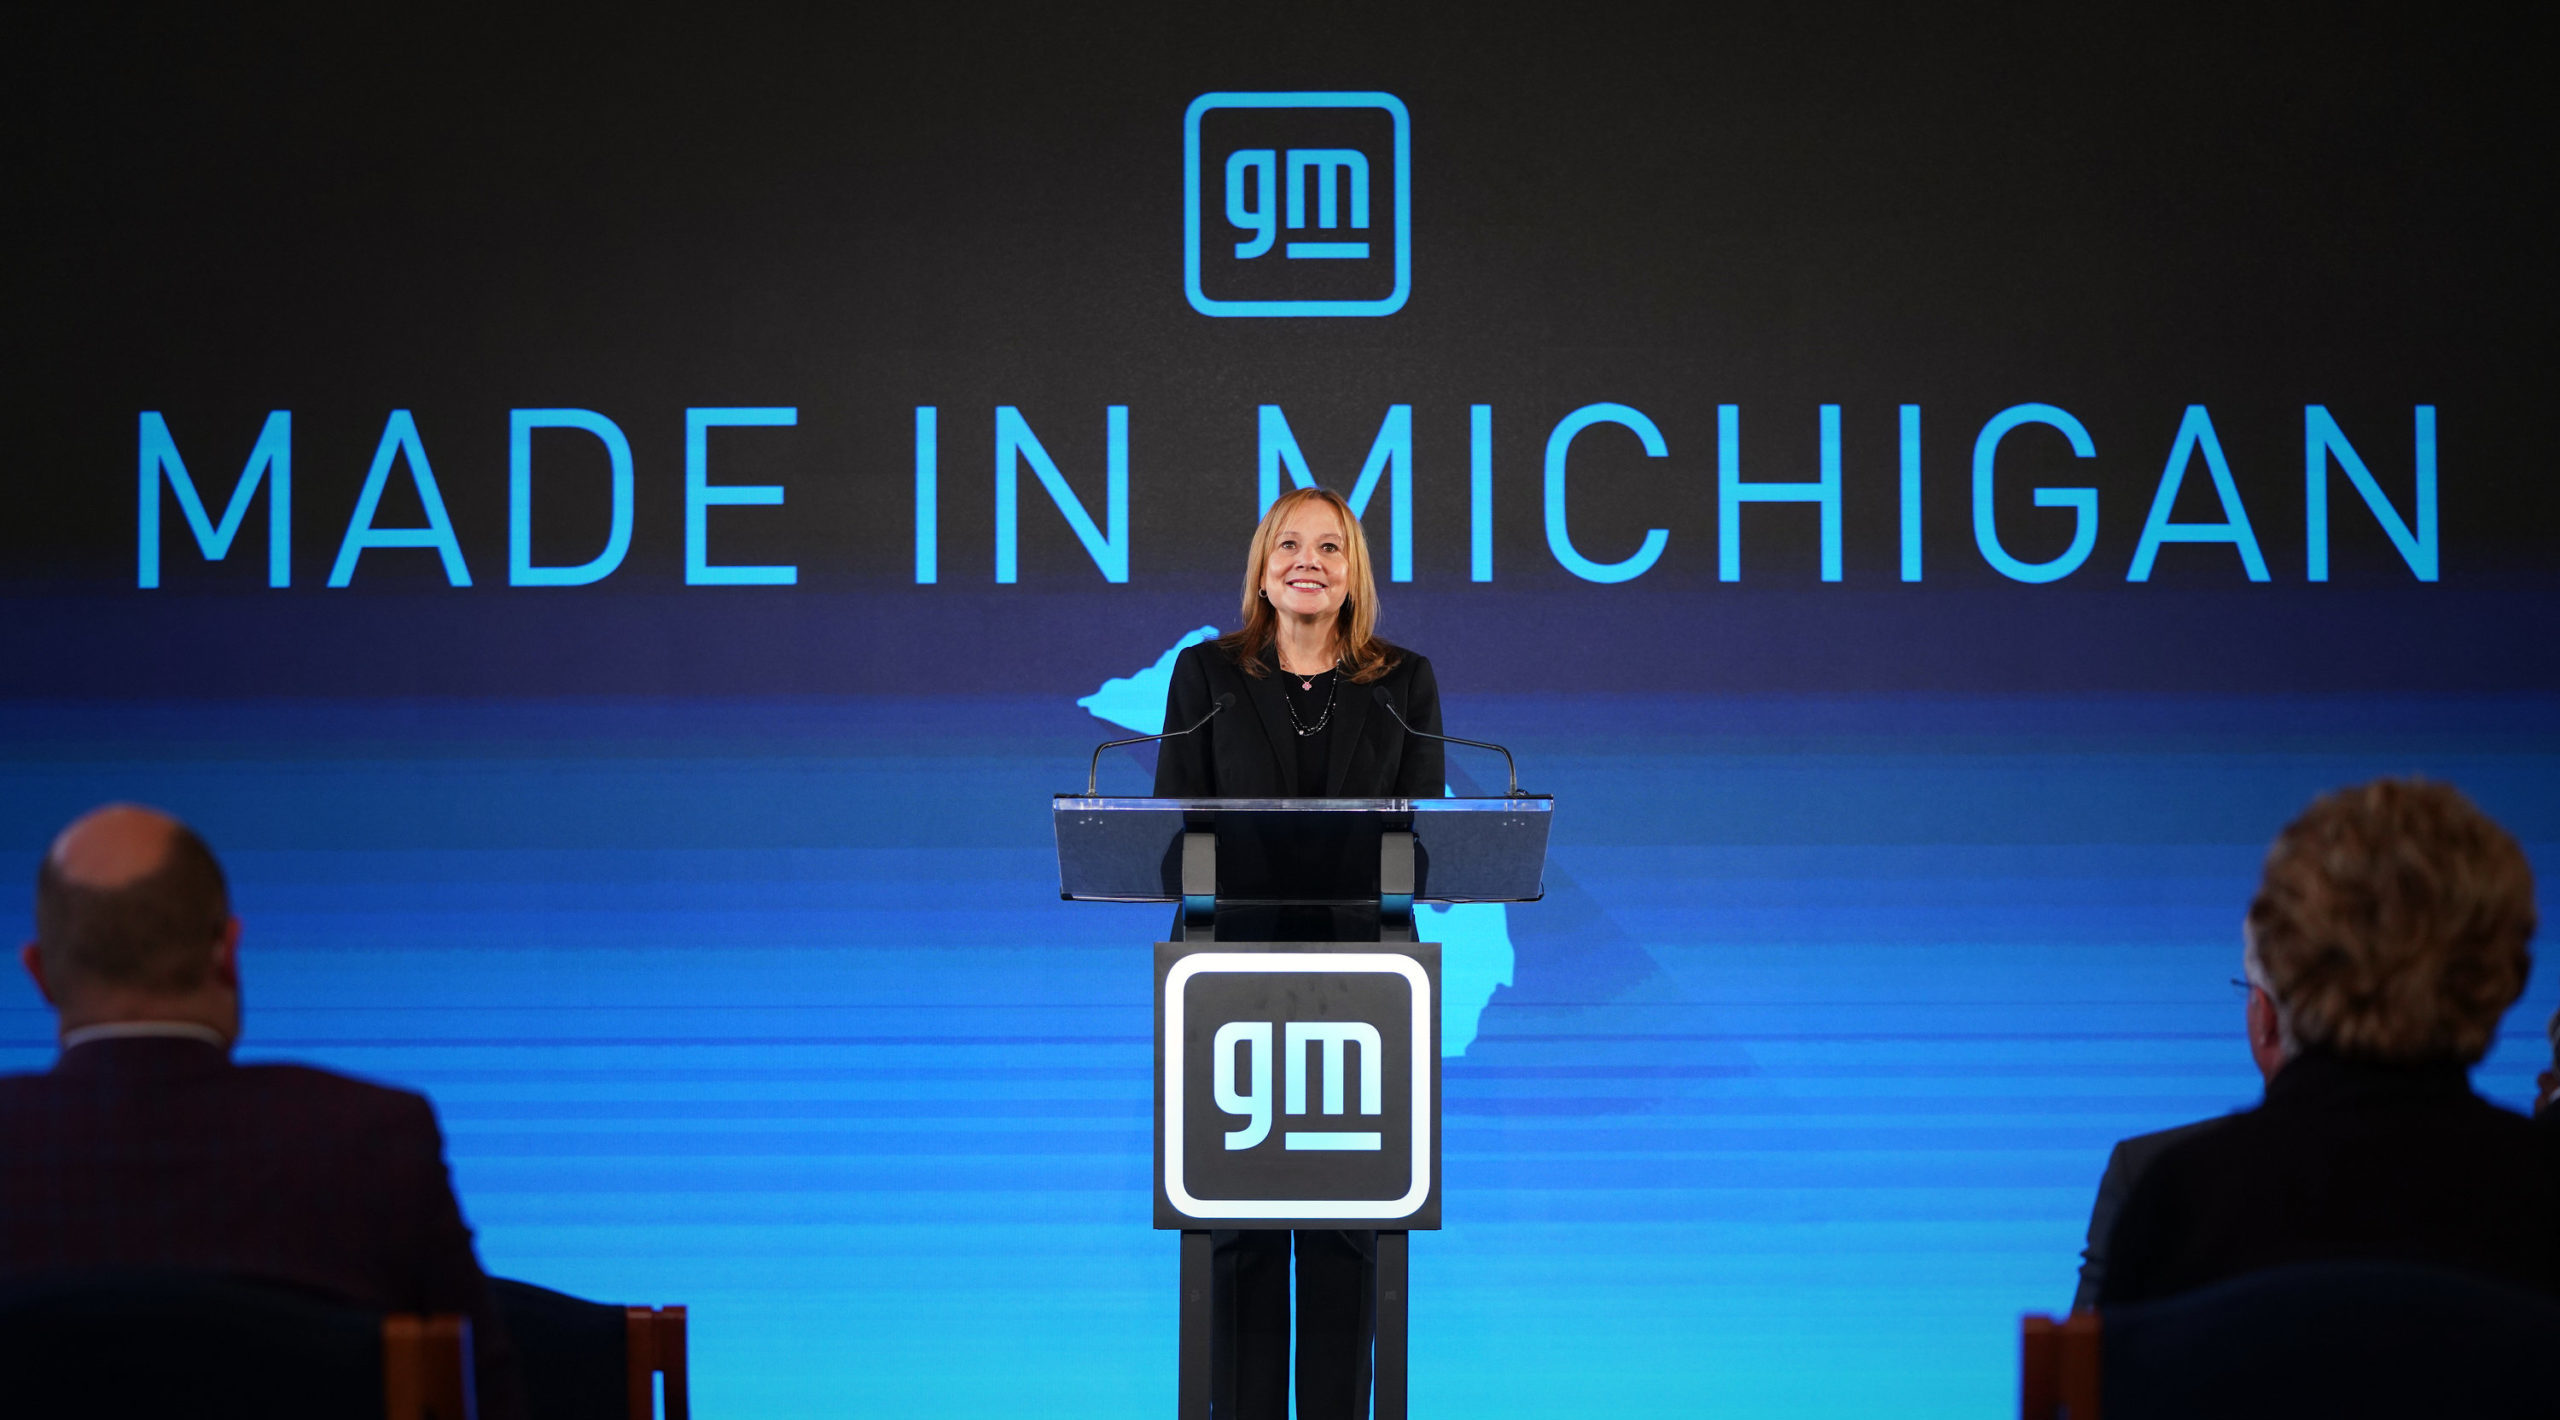 General Motors Chair and CEO Mary Barra announces Tuesday, January 25, 2022 a GM investment of more than $7 billion in four Michigan manufacturing sites that includes building a new Ultium Cells battery cell plant in Lansing and converting the GM Orion Assembly plant to build full-size electric pickups. The investment will create 4,000 new jobs and retain 1,000. Barra made the announcement from the Senate Hearing Room of the Boji Tower in Lansing, Michigan. (Photo by John F. Martin for General Motors)